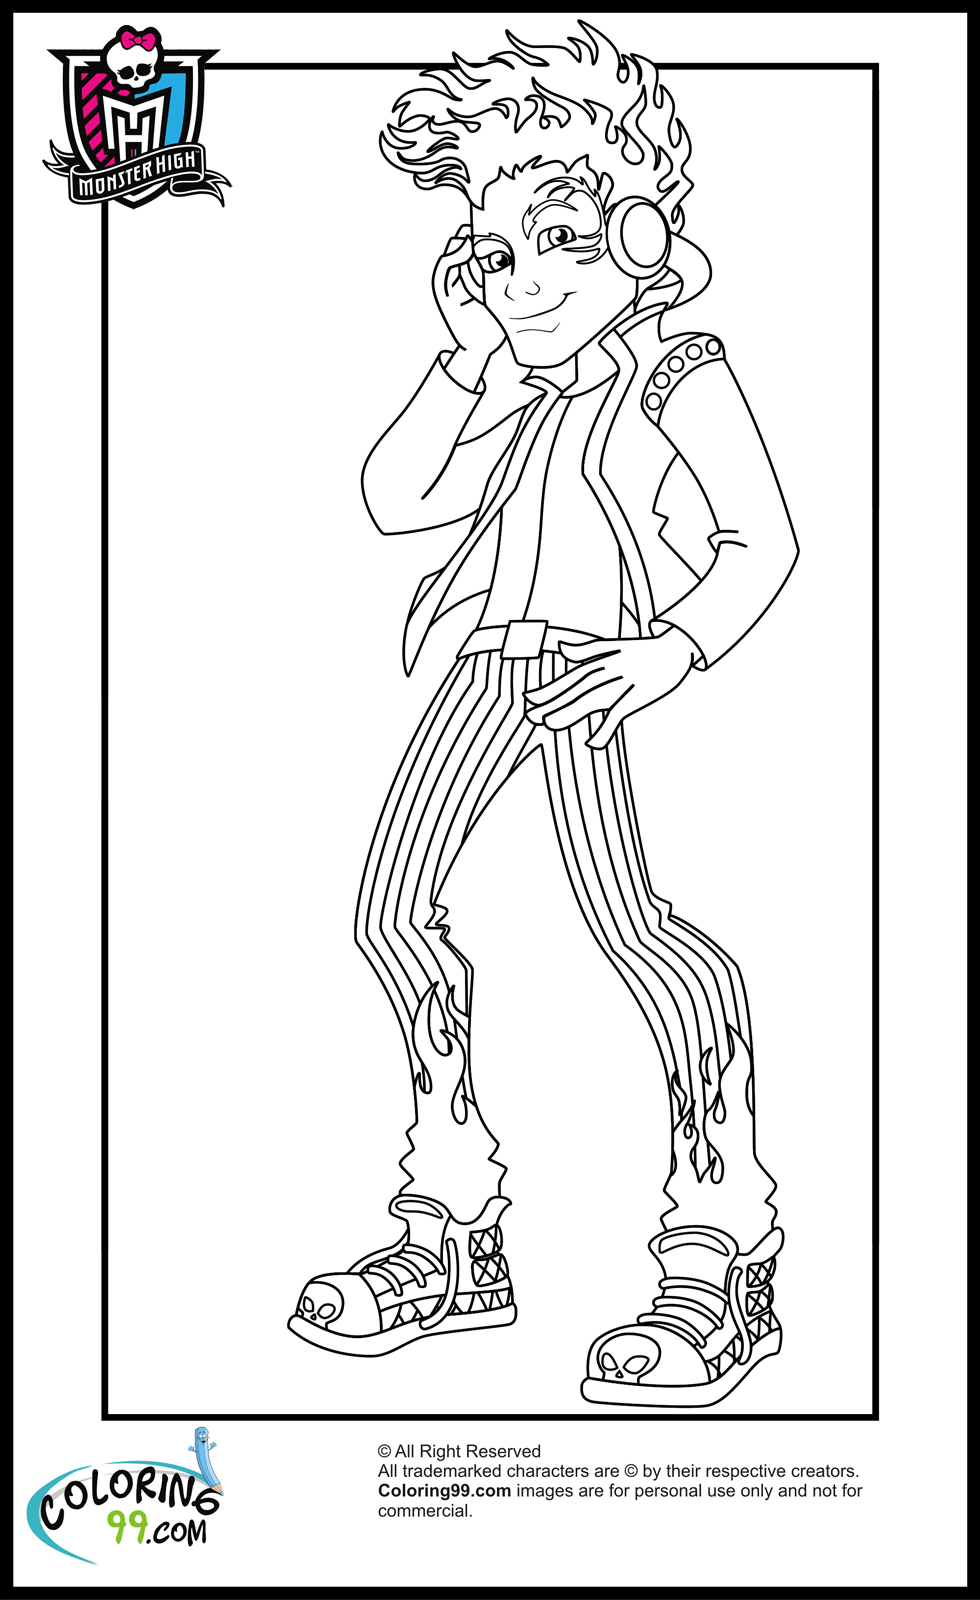 Monster High Boys Coloring Pages | Team colors